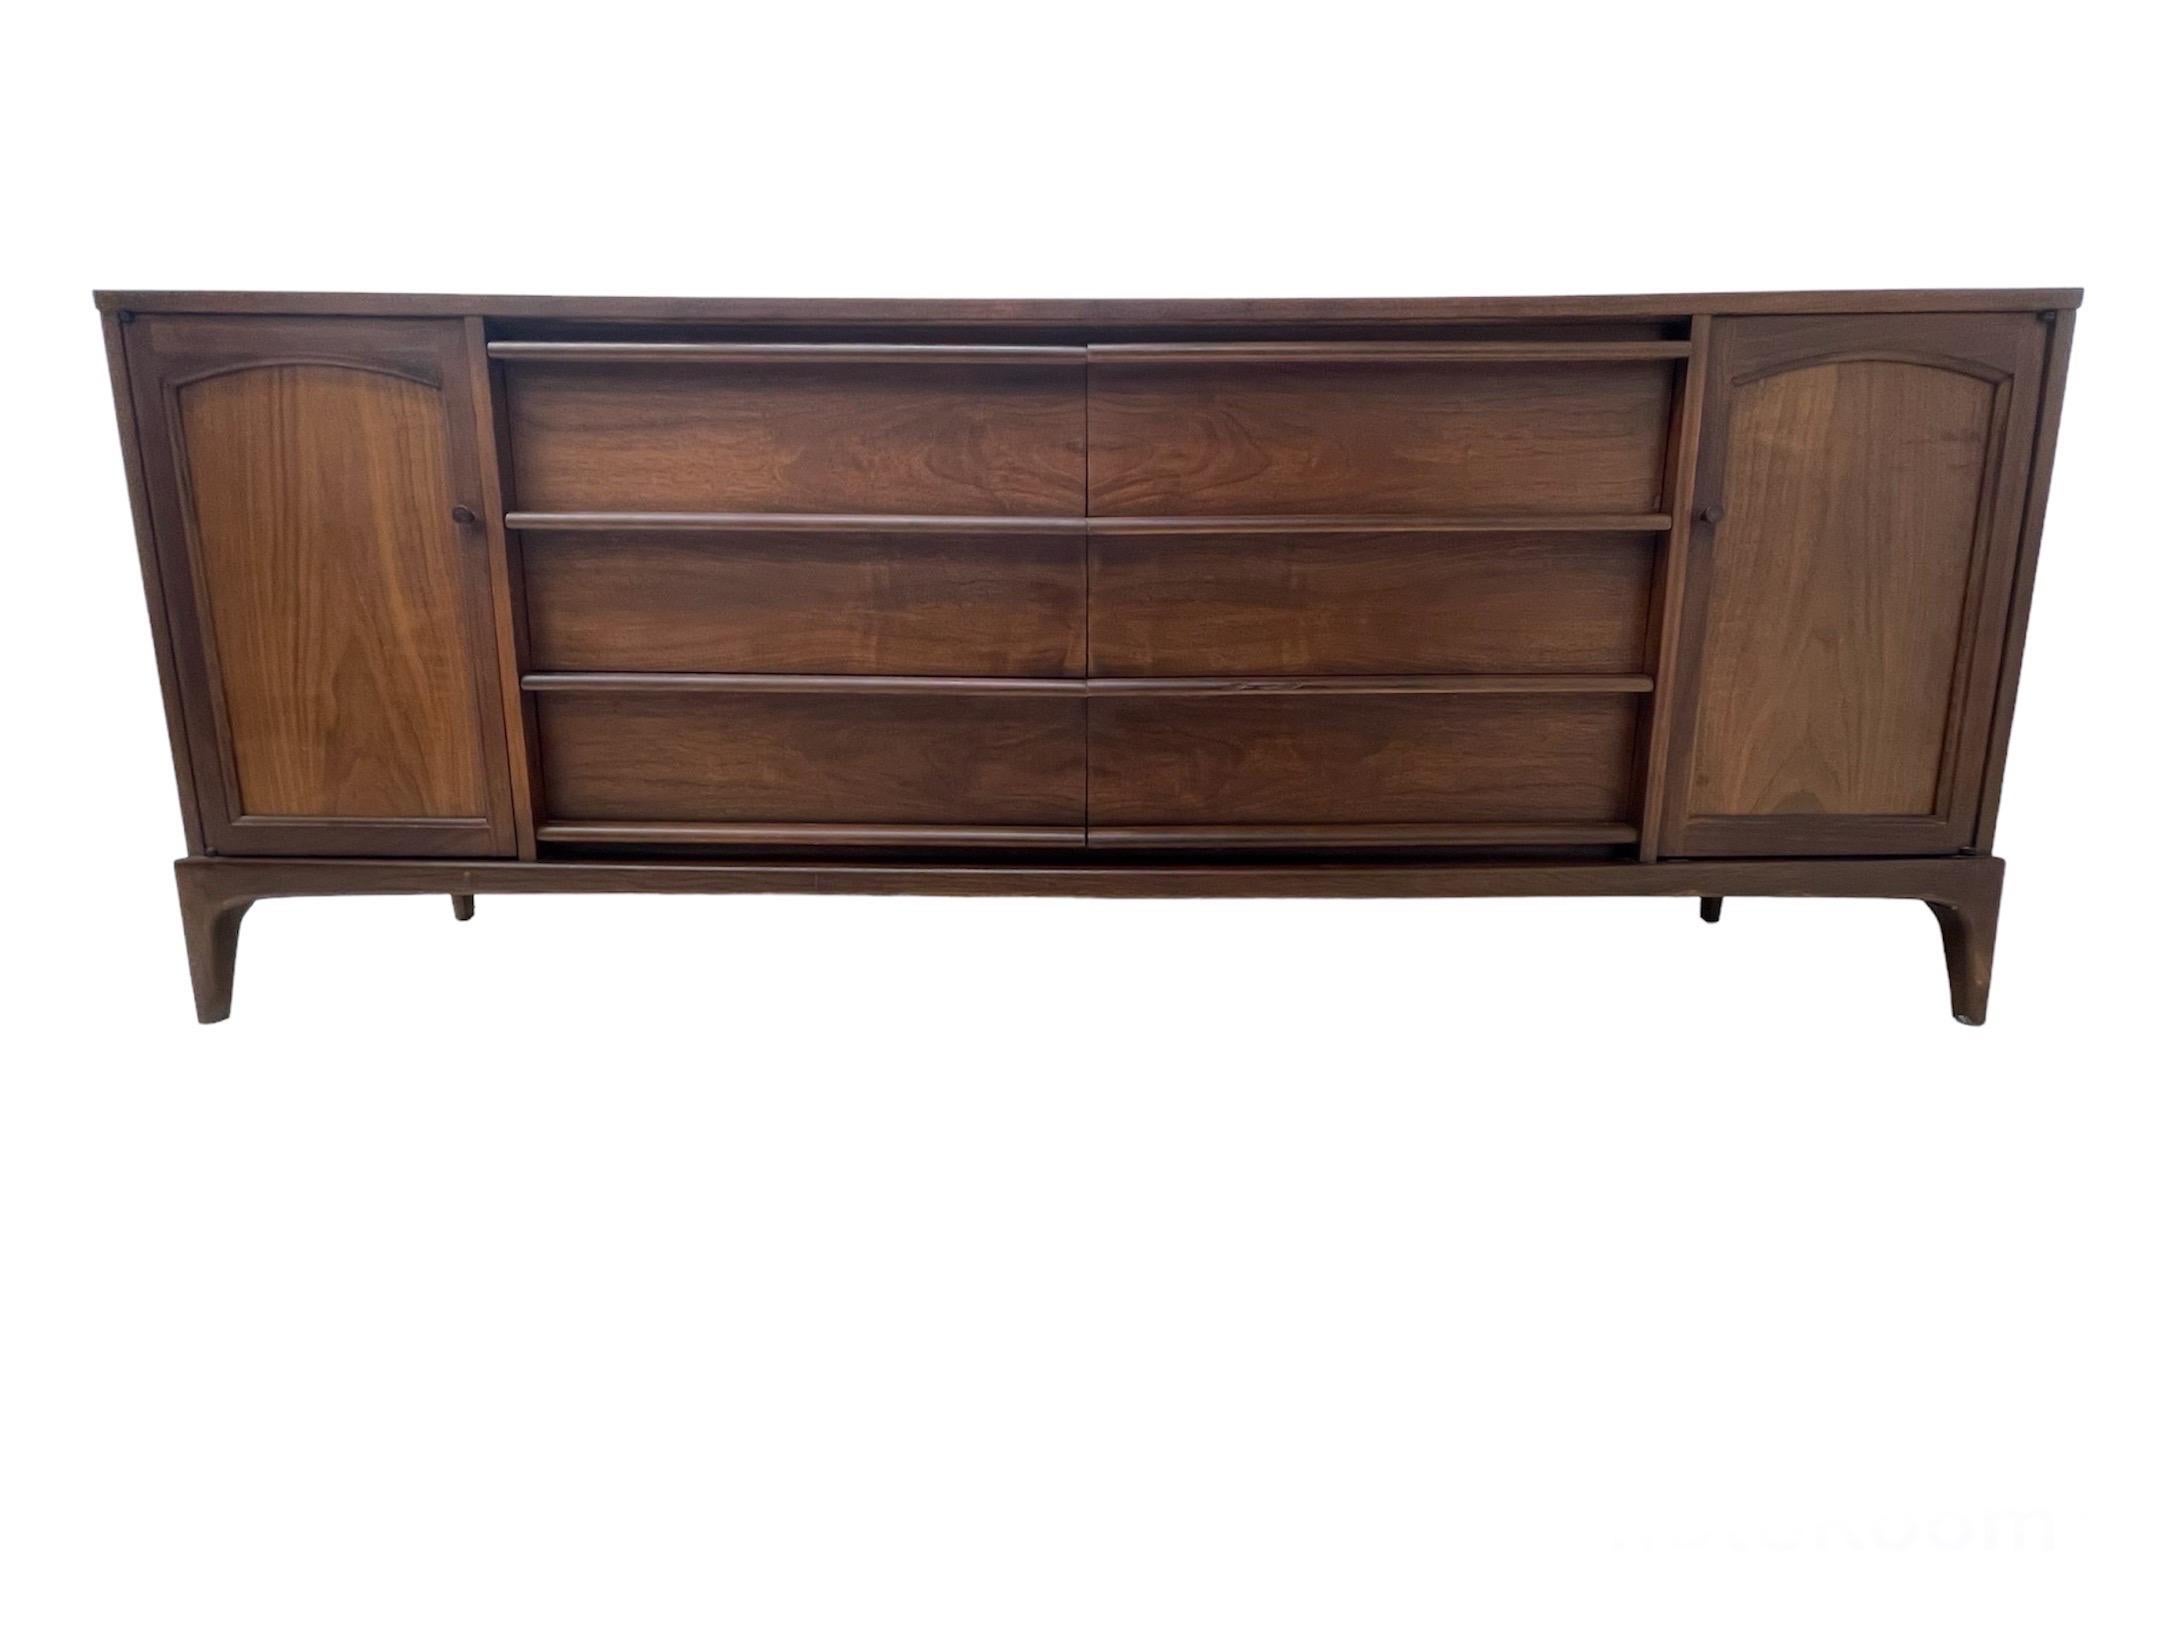 Vintage Mid-Century Modern Credenza cabinet Dovetail drawers. Interchangeable Cabinet Doors as Pictured
Dimensions. 80 W ; 18 1/2 D ; 31 H.